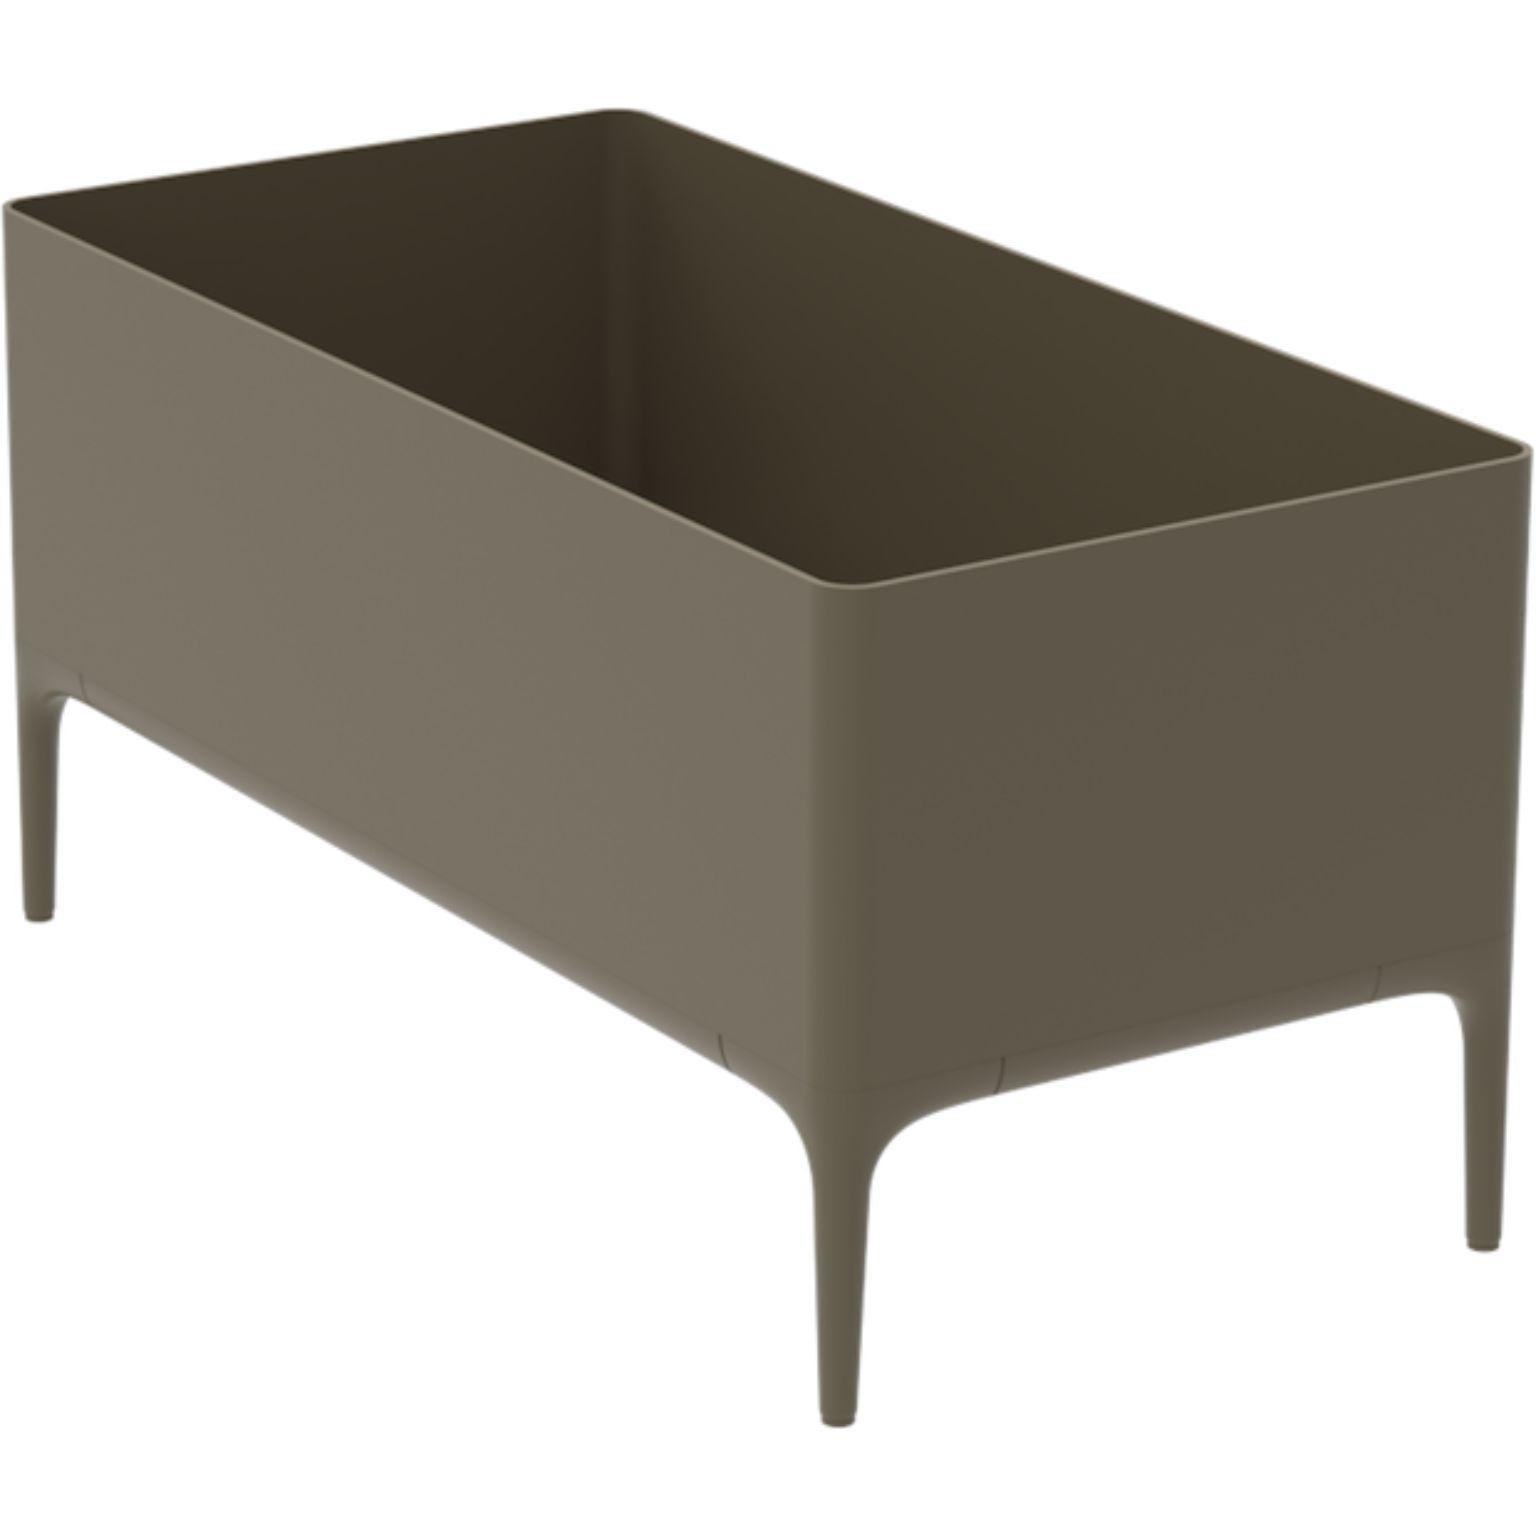 Xaloc Bronze Planter by MOWEE
Dimensions: D90 x W45 x H45 cm
Material: Aluminium
Weight: 11 kg
Also Available in different colours and finishes. 

 Xaloc synthesizes the lines of interior furniture to extrapolate to the exterior, creating an